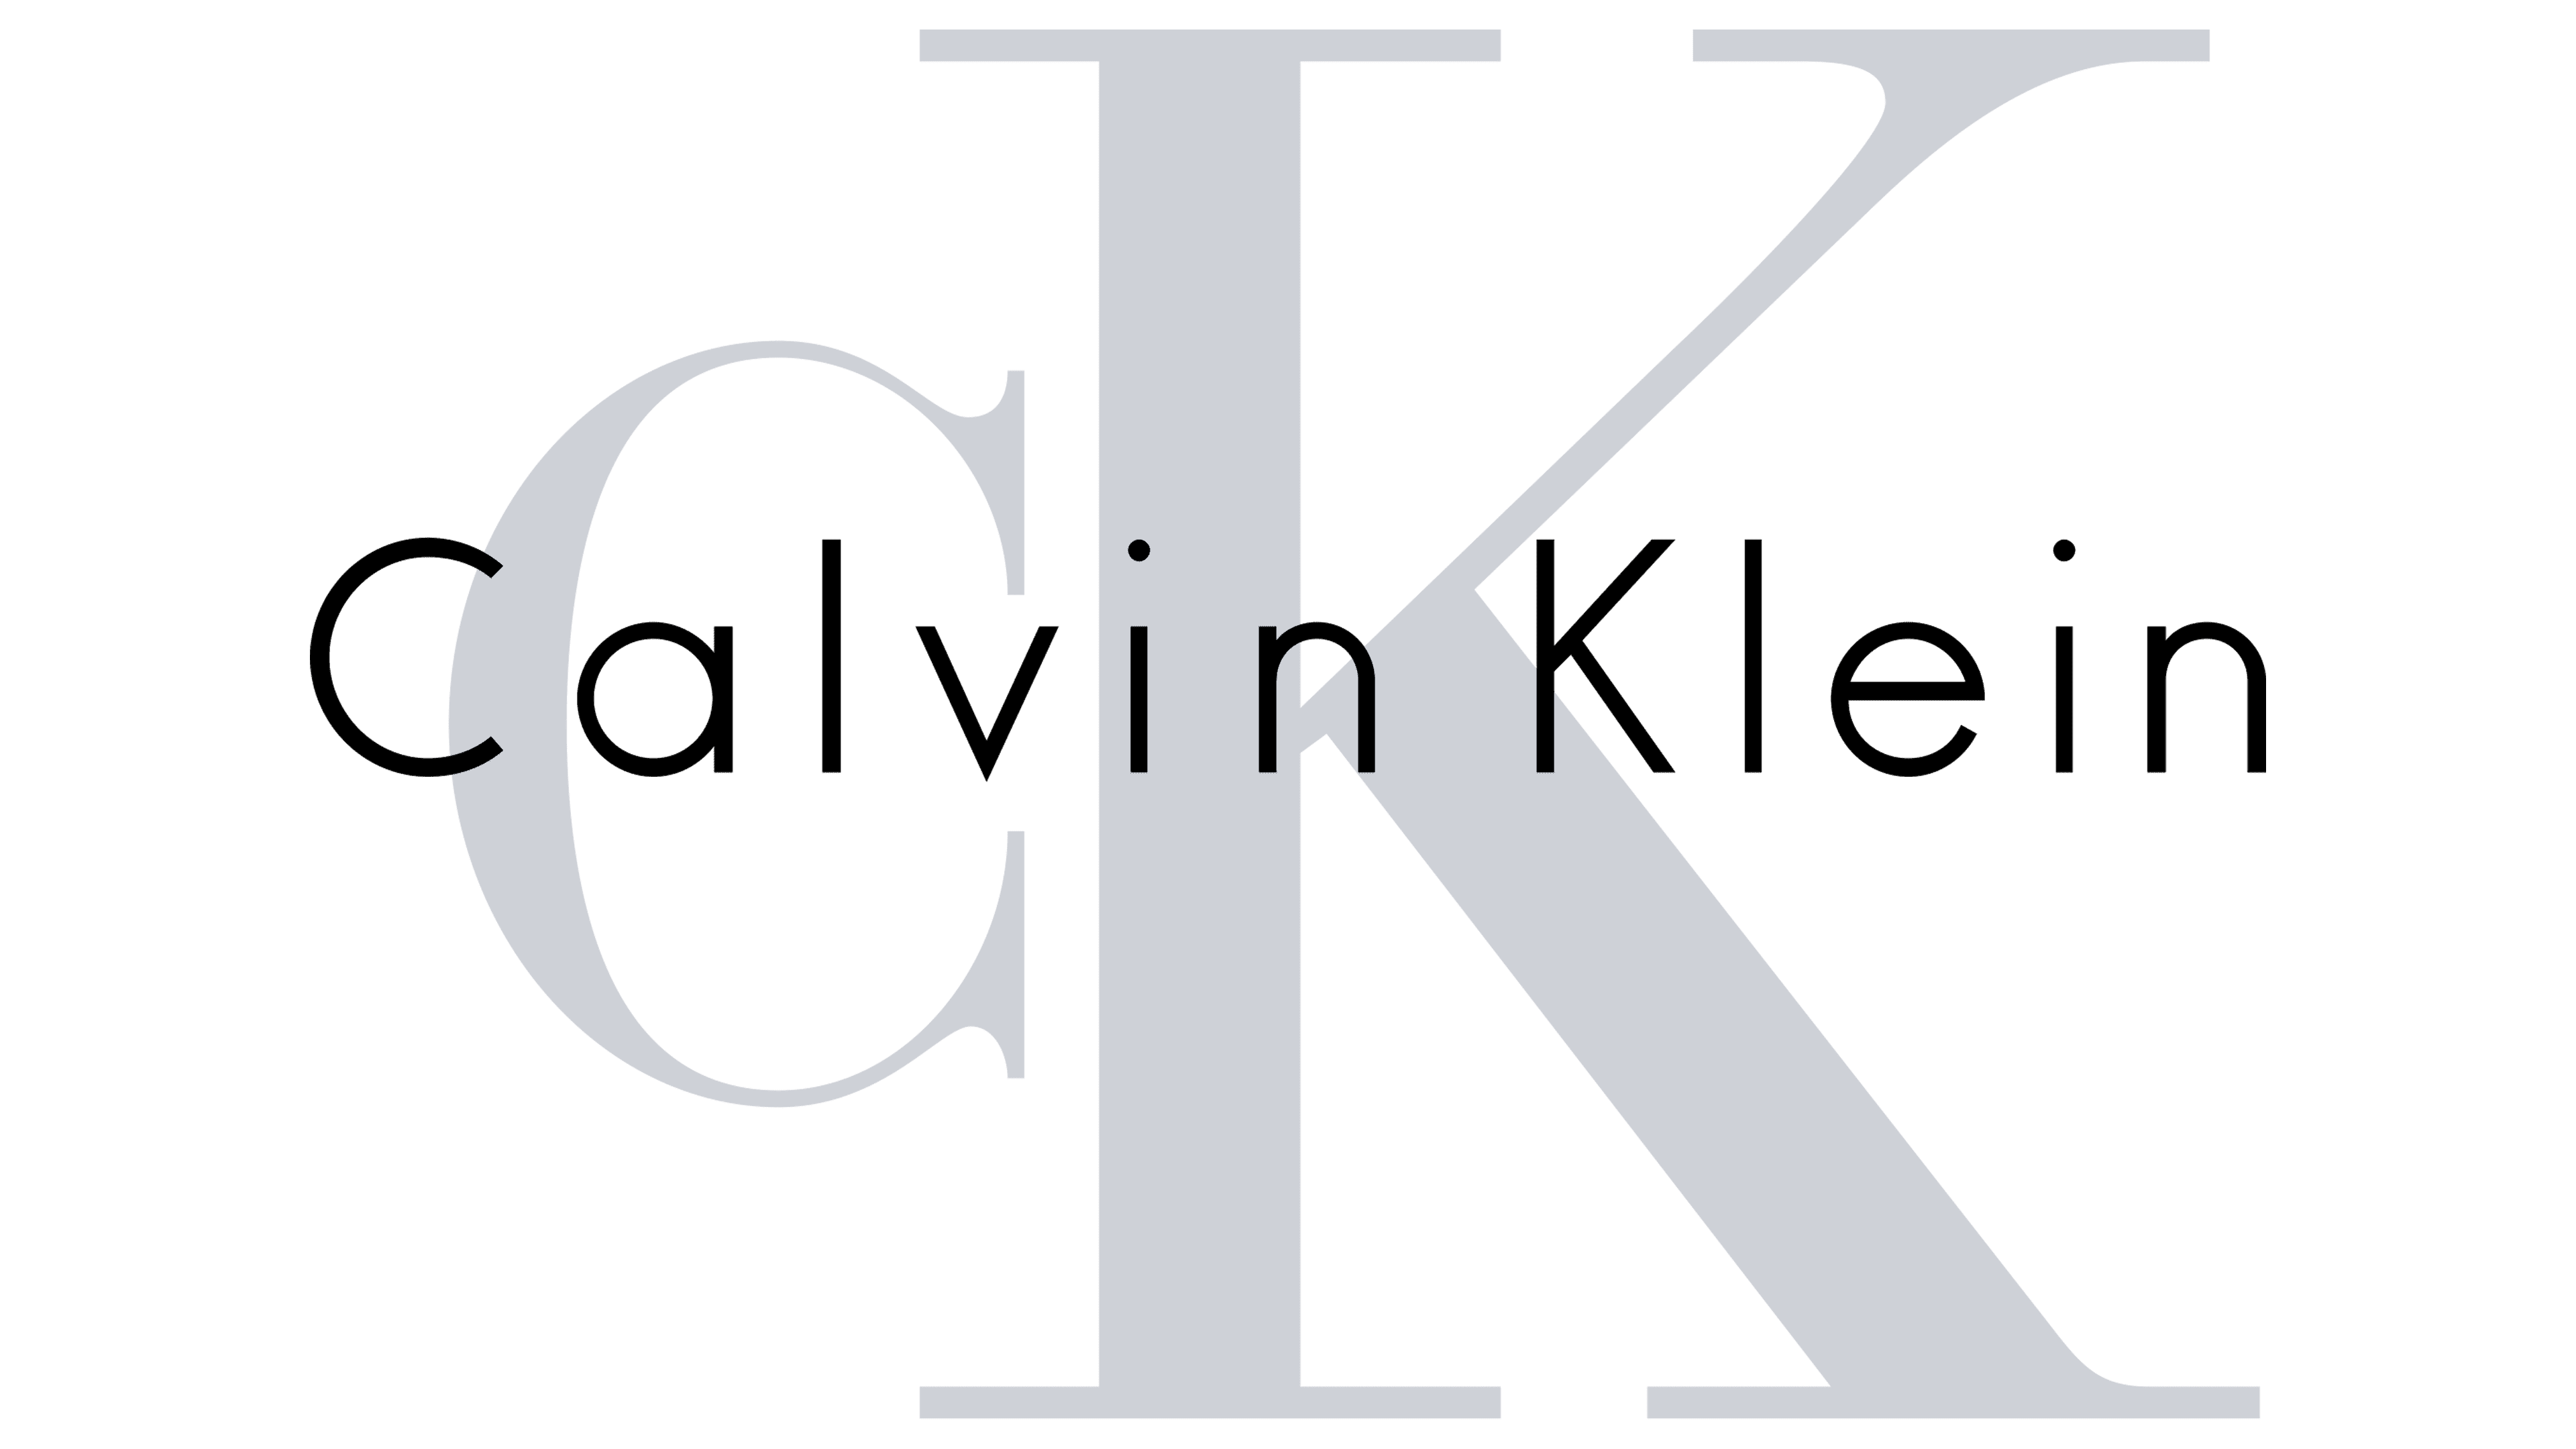 Calvin Klein Logo, symbol, meaning, brand PNG, history